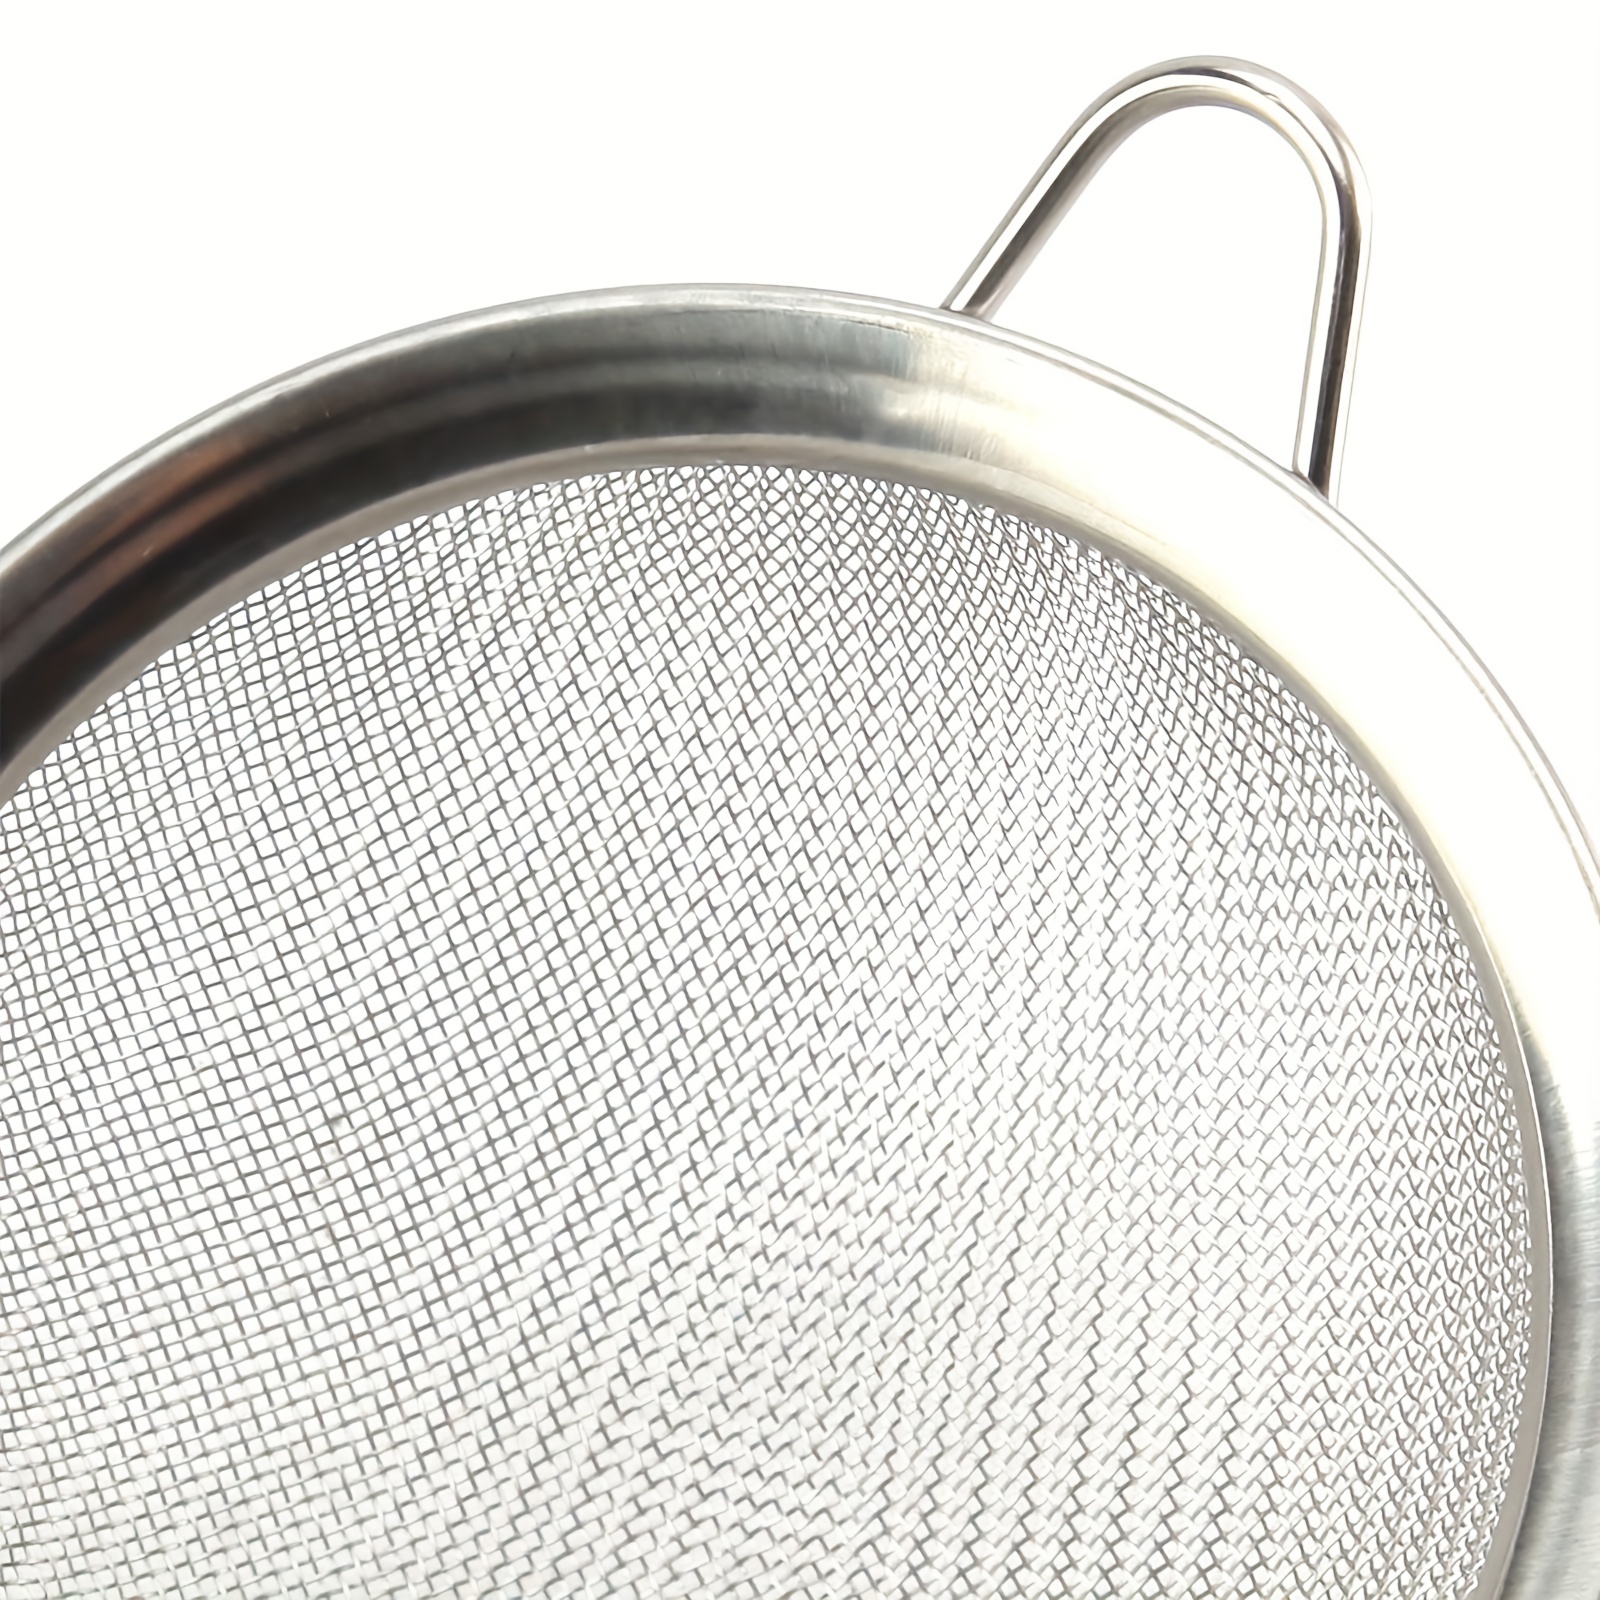 How to Use a Fine Mesh Sieve